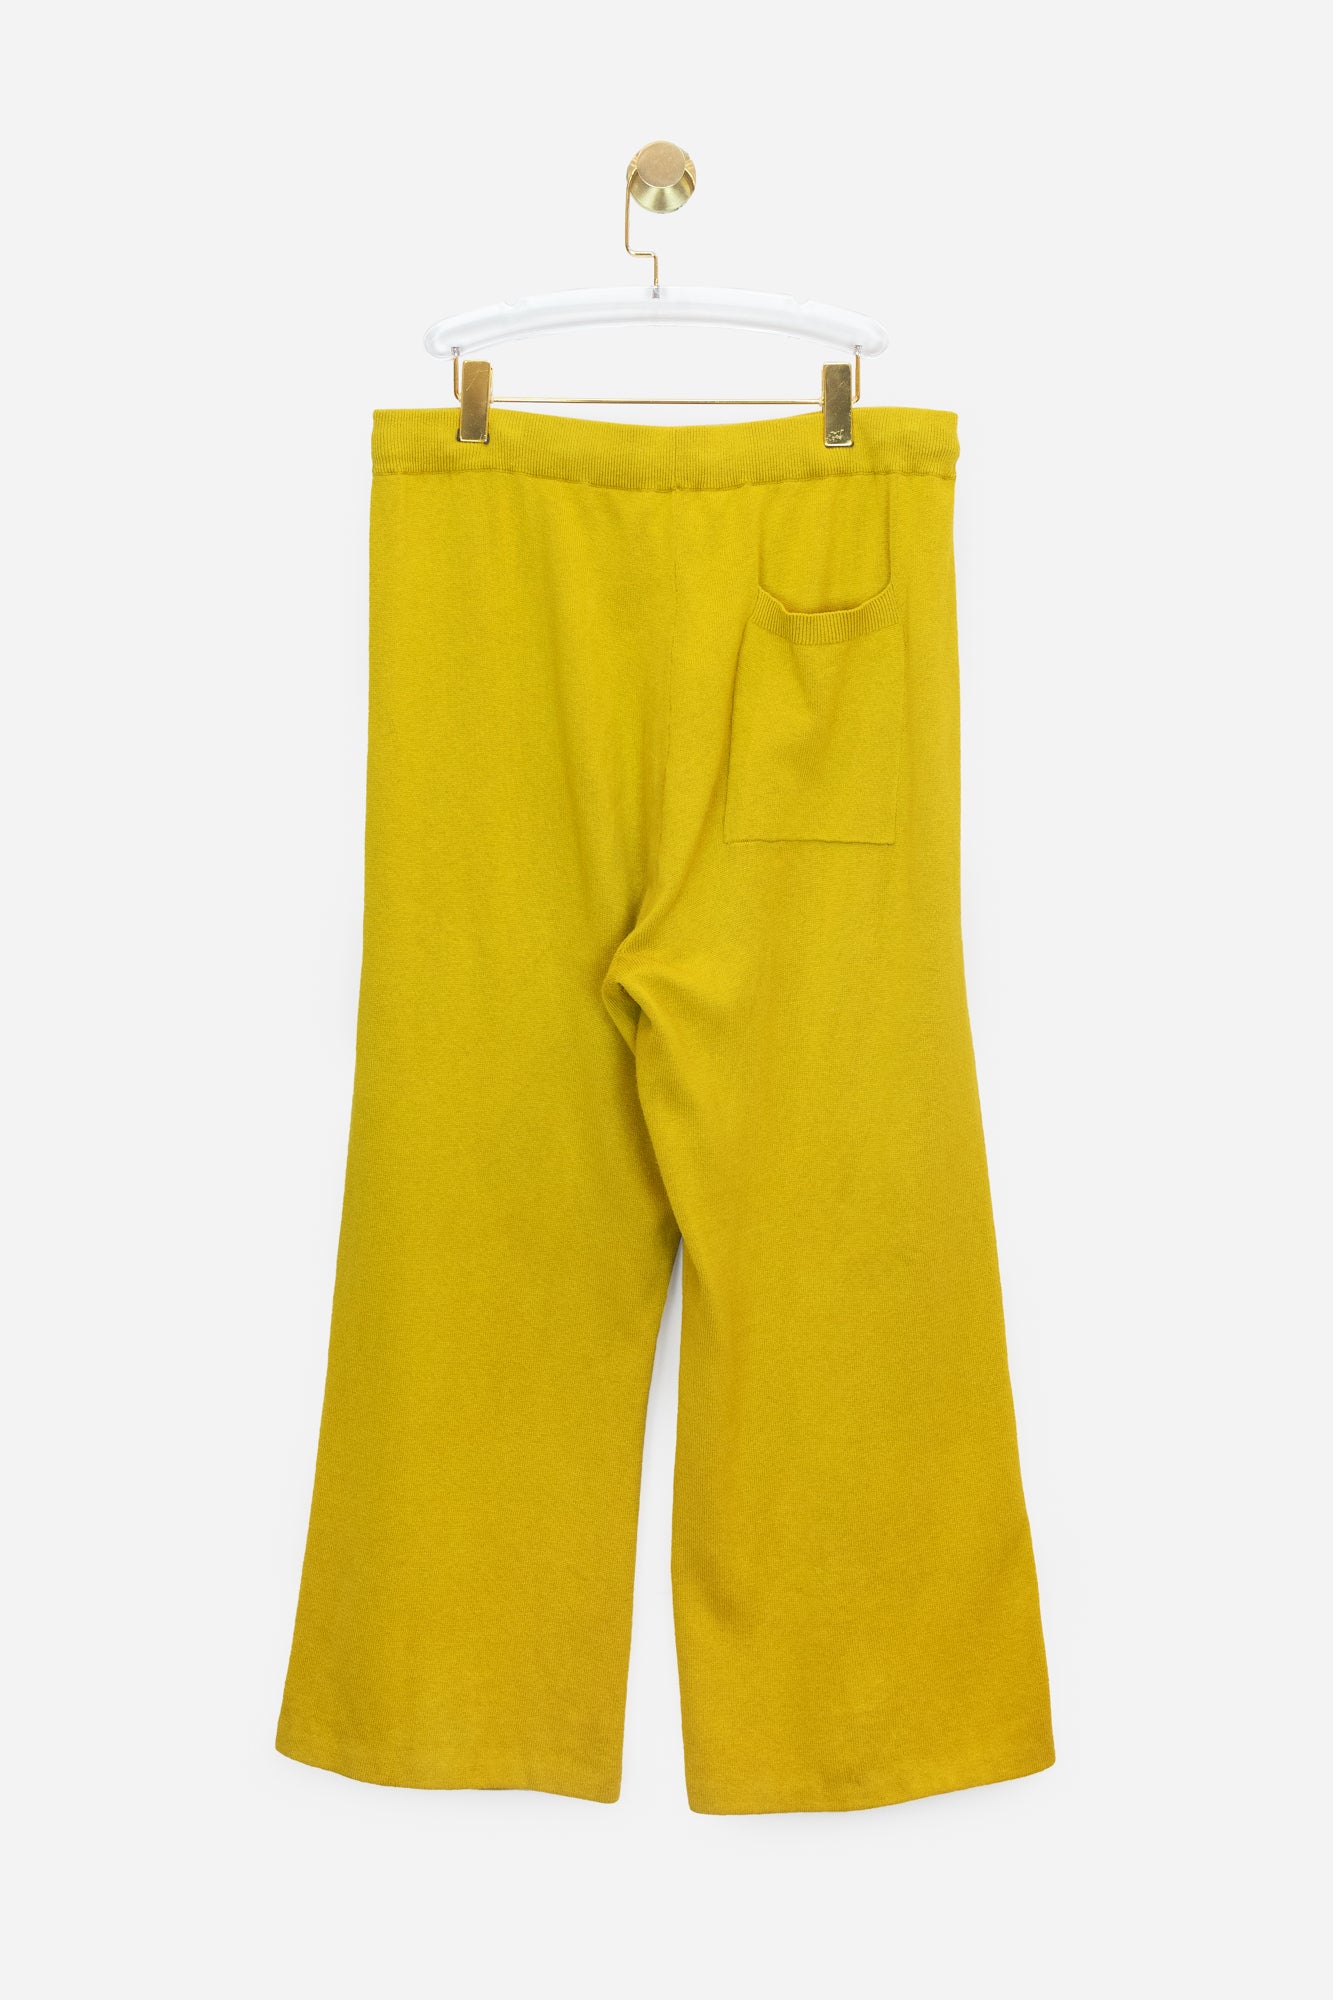 'Barb' Mustard Wide Leg Knit Pant with Pink Heart